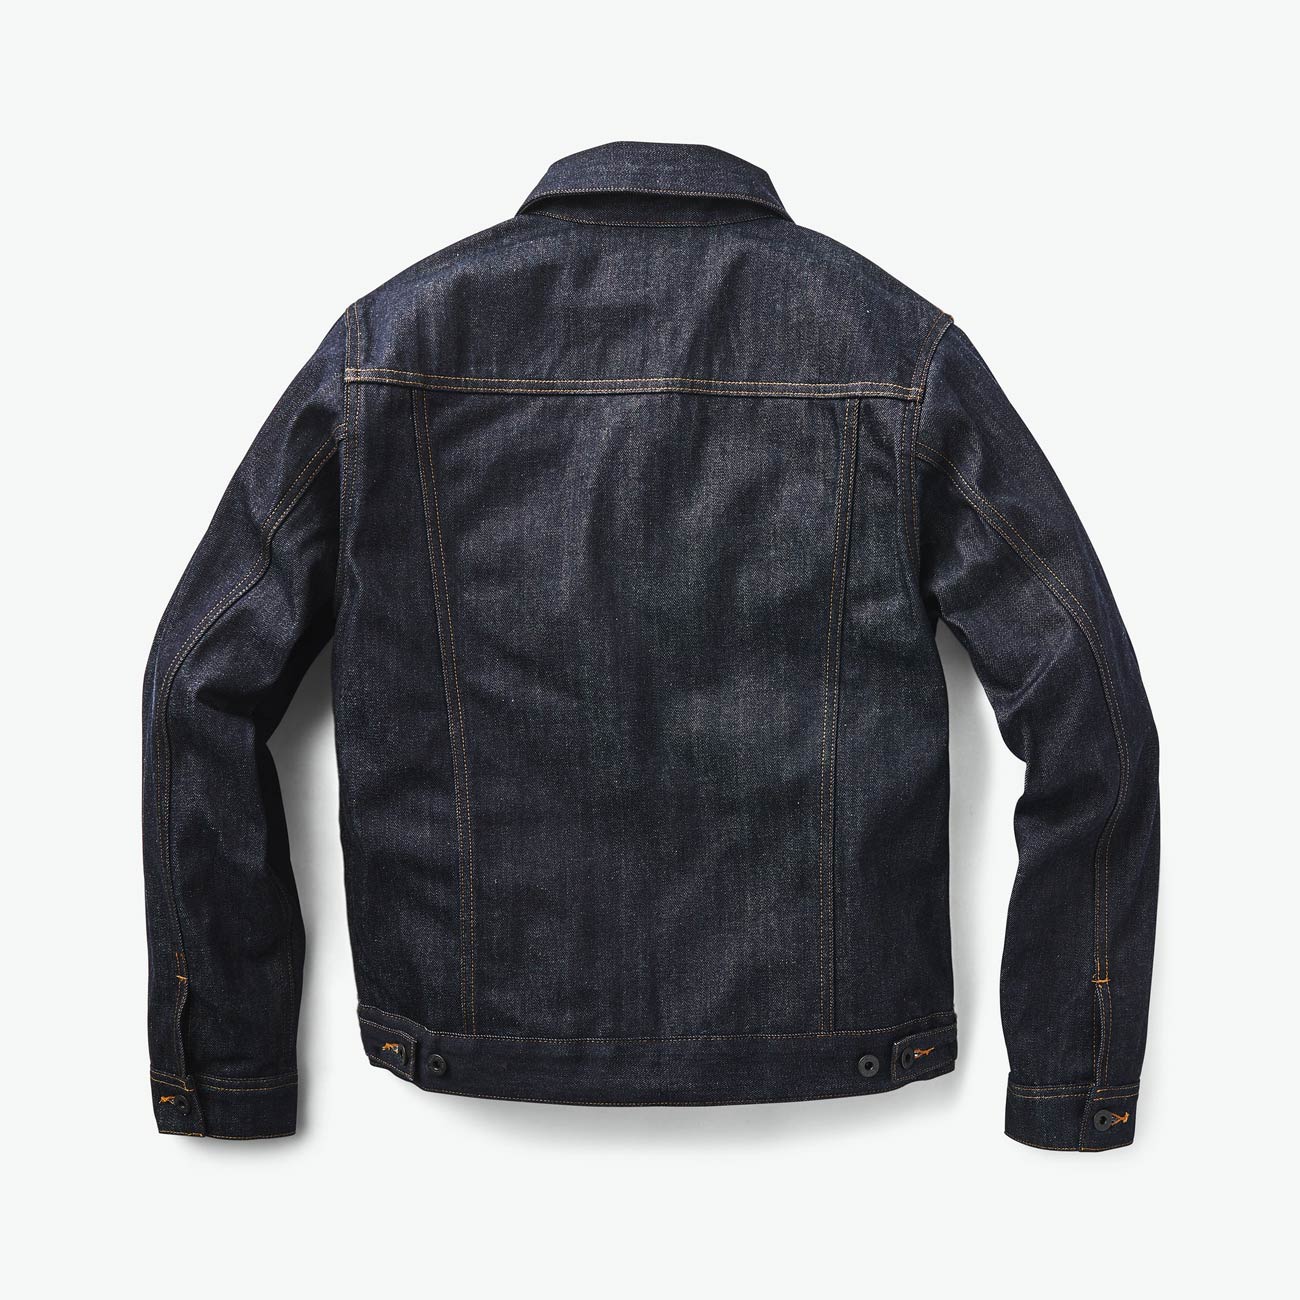 Filson Introduces ‘Raw Indigo’ Cruiser Jacket Made With Denim From The ...